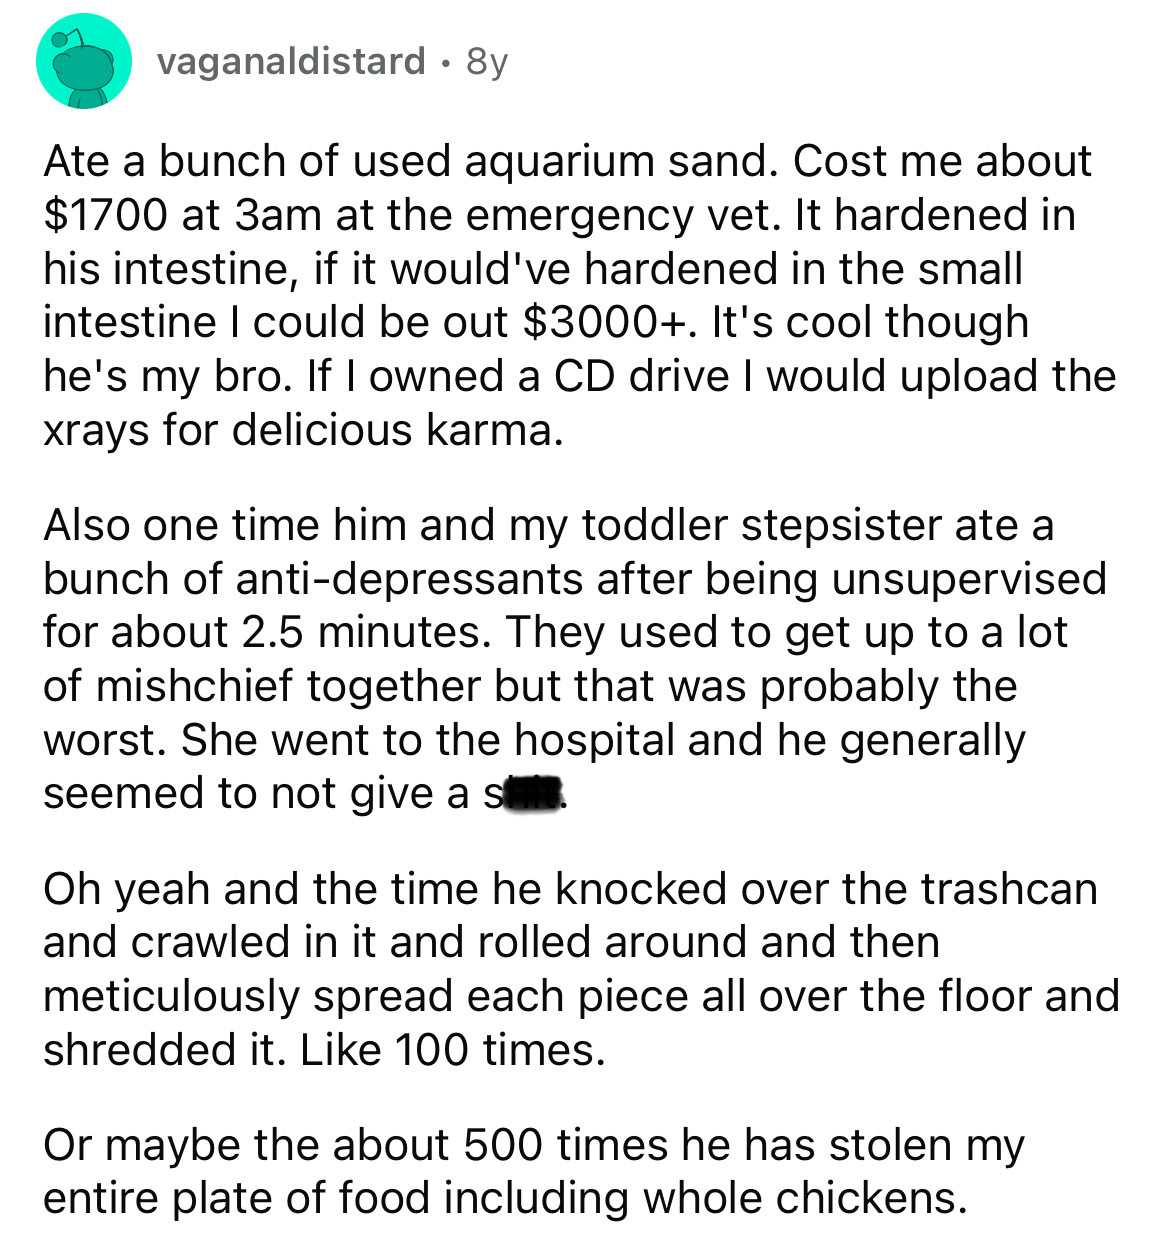 document - vaganaldistard . 8y Ate a bunch of used aquarium sand. Cost me about $1700 at 3am at the emergency vet. It hardened in his intestine, if it would've hardened in the small intestine I could be out $3000. It's cool though he's my bro. If I owned 